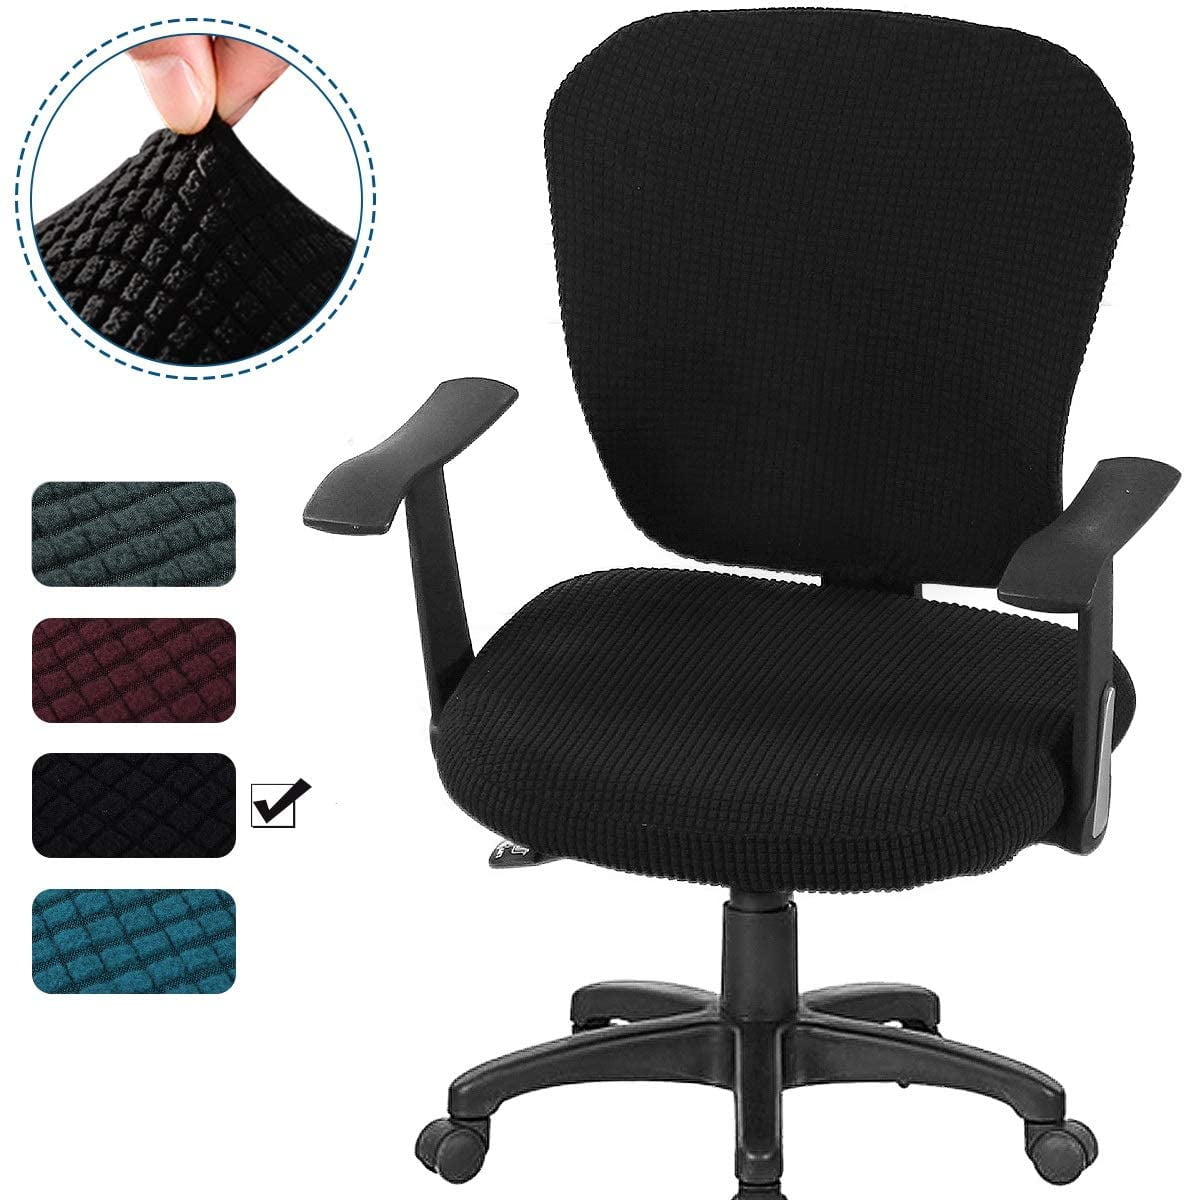 Swivel Computer Chair Cover Stretch Office Chair Seat Protector Slipcover 